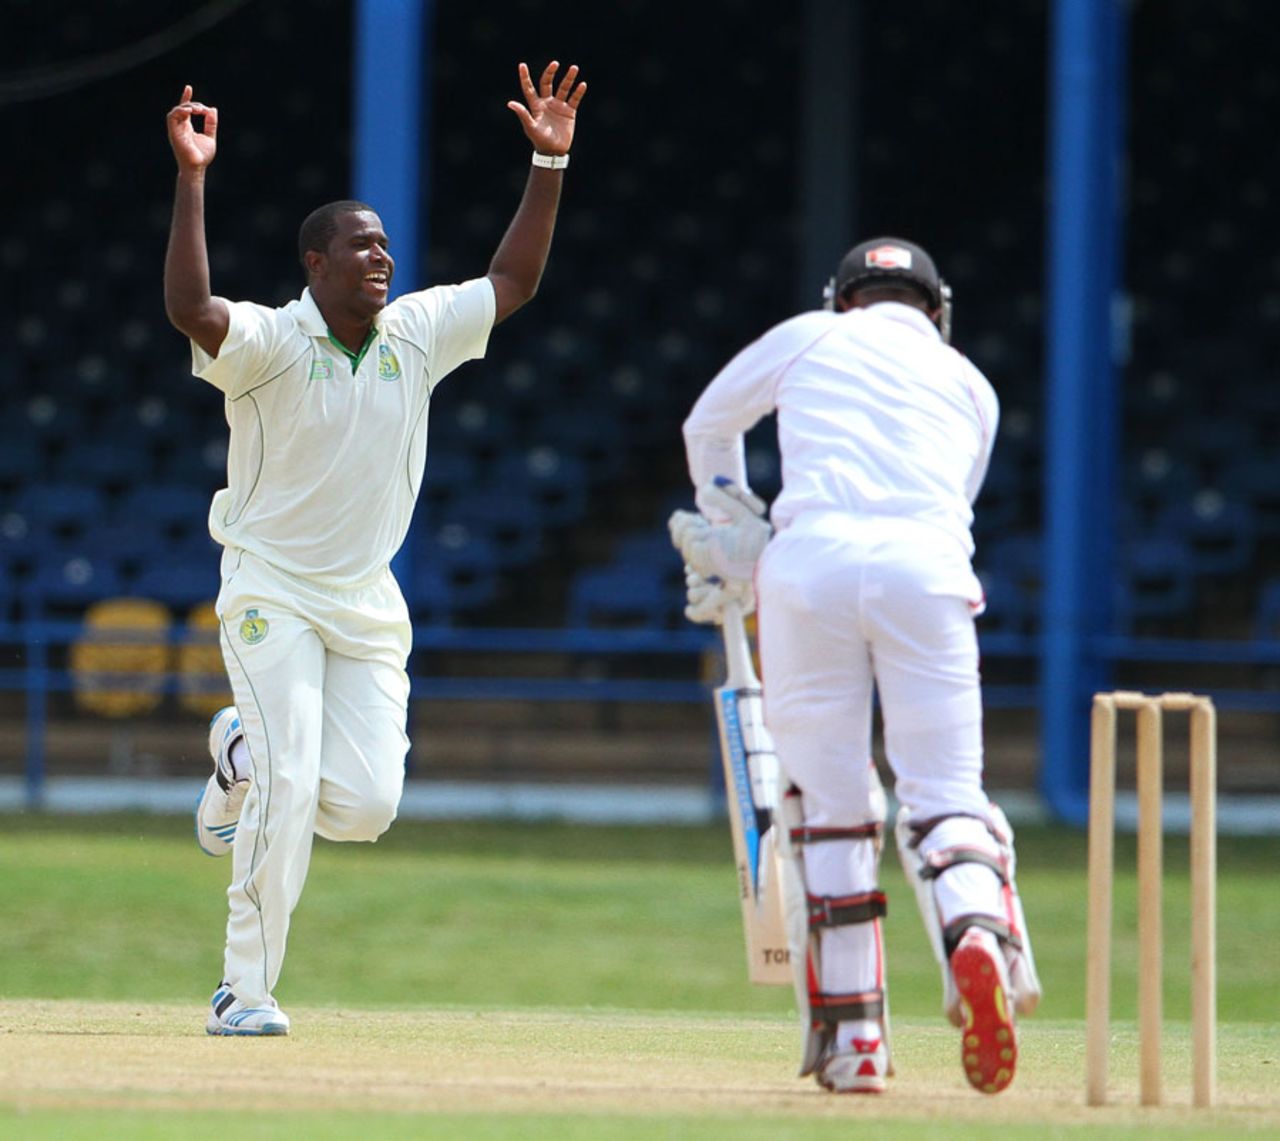 Mervin Mathew picked up 4 for 19, Trinidad & Tobago v Windward Islands, Regional Four Day Competition, semi-final, 2nd day, Port of Spain, April 20, 2014